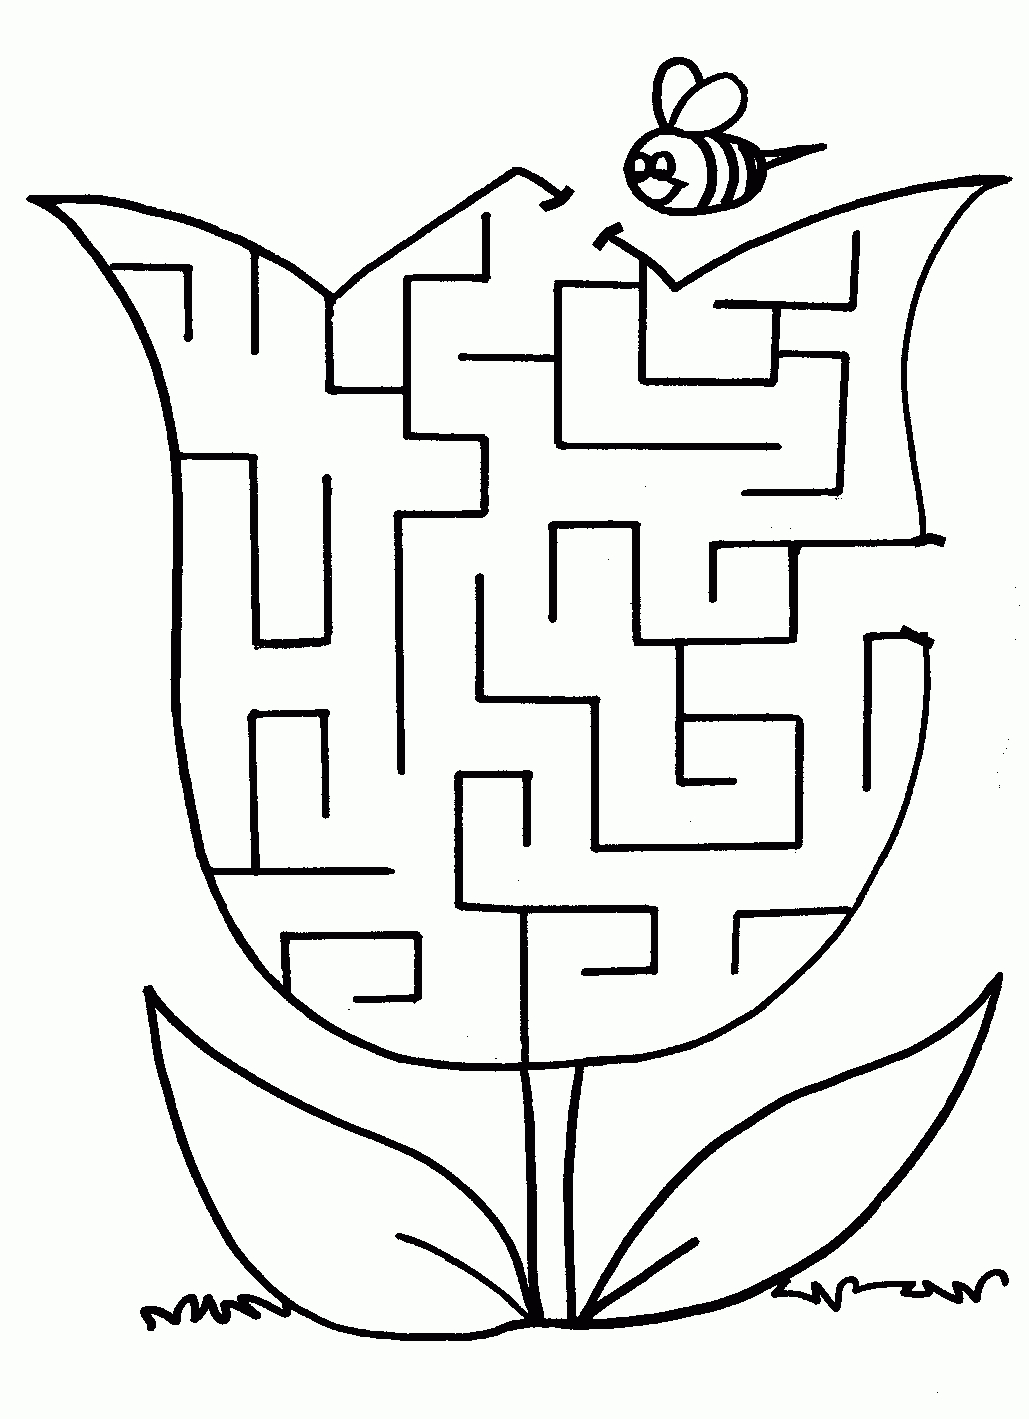 Easy Mazes. Printable Mazes For Kids. - Best Coloring Pages For Kids - Printable Flower Puzzle